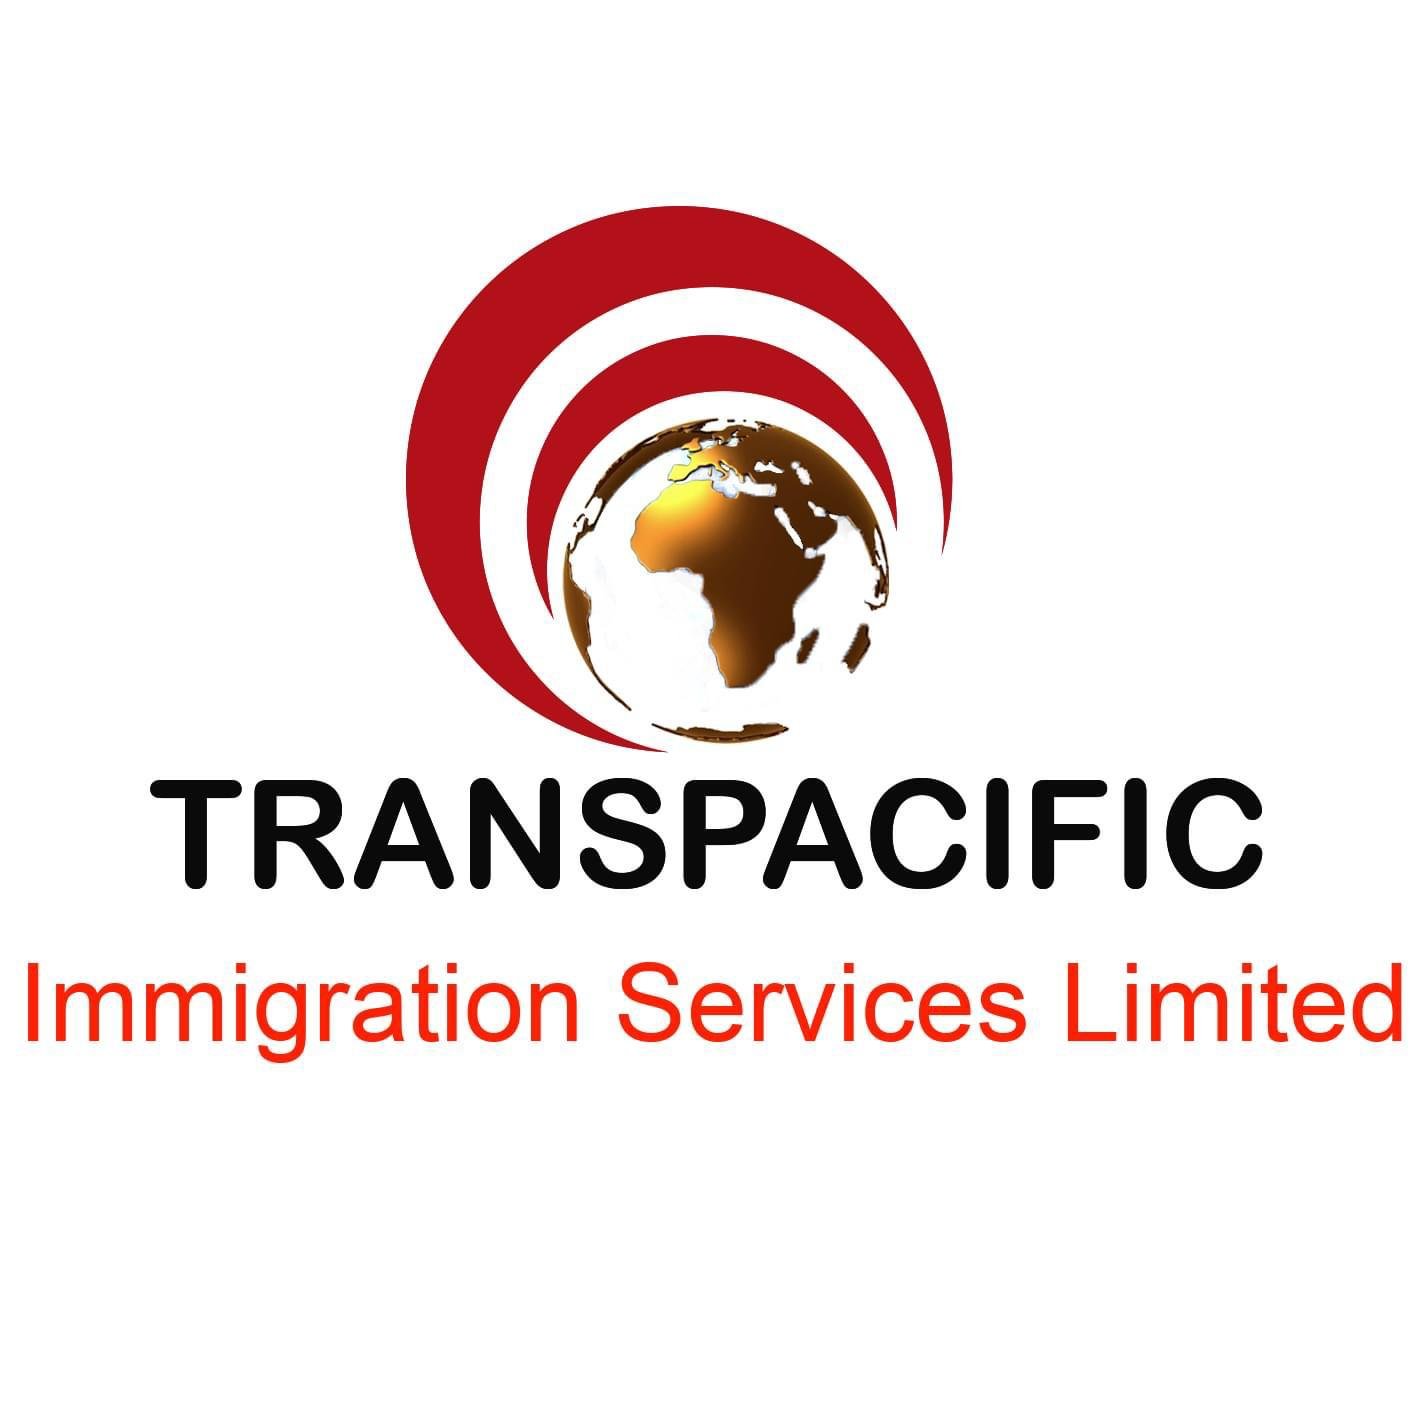 Transpacific Immigration Services Limited